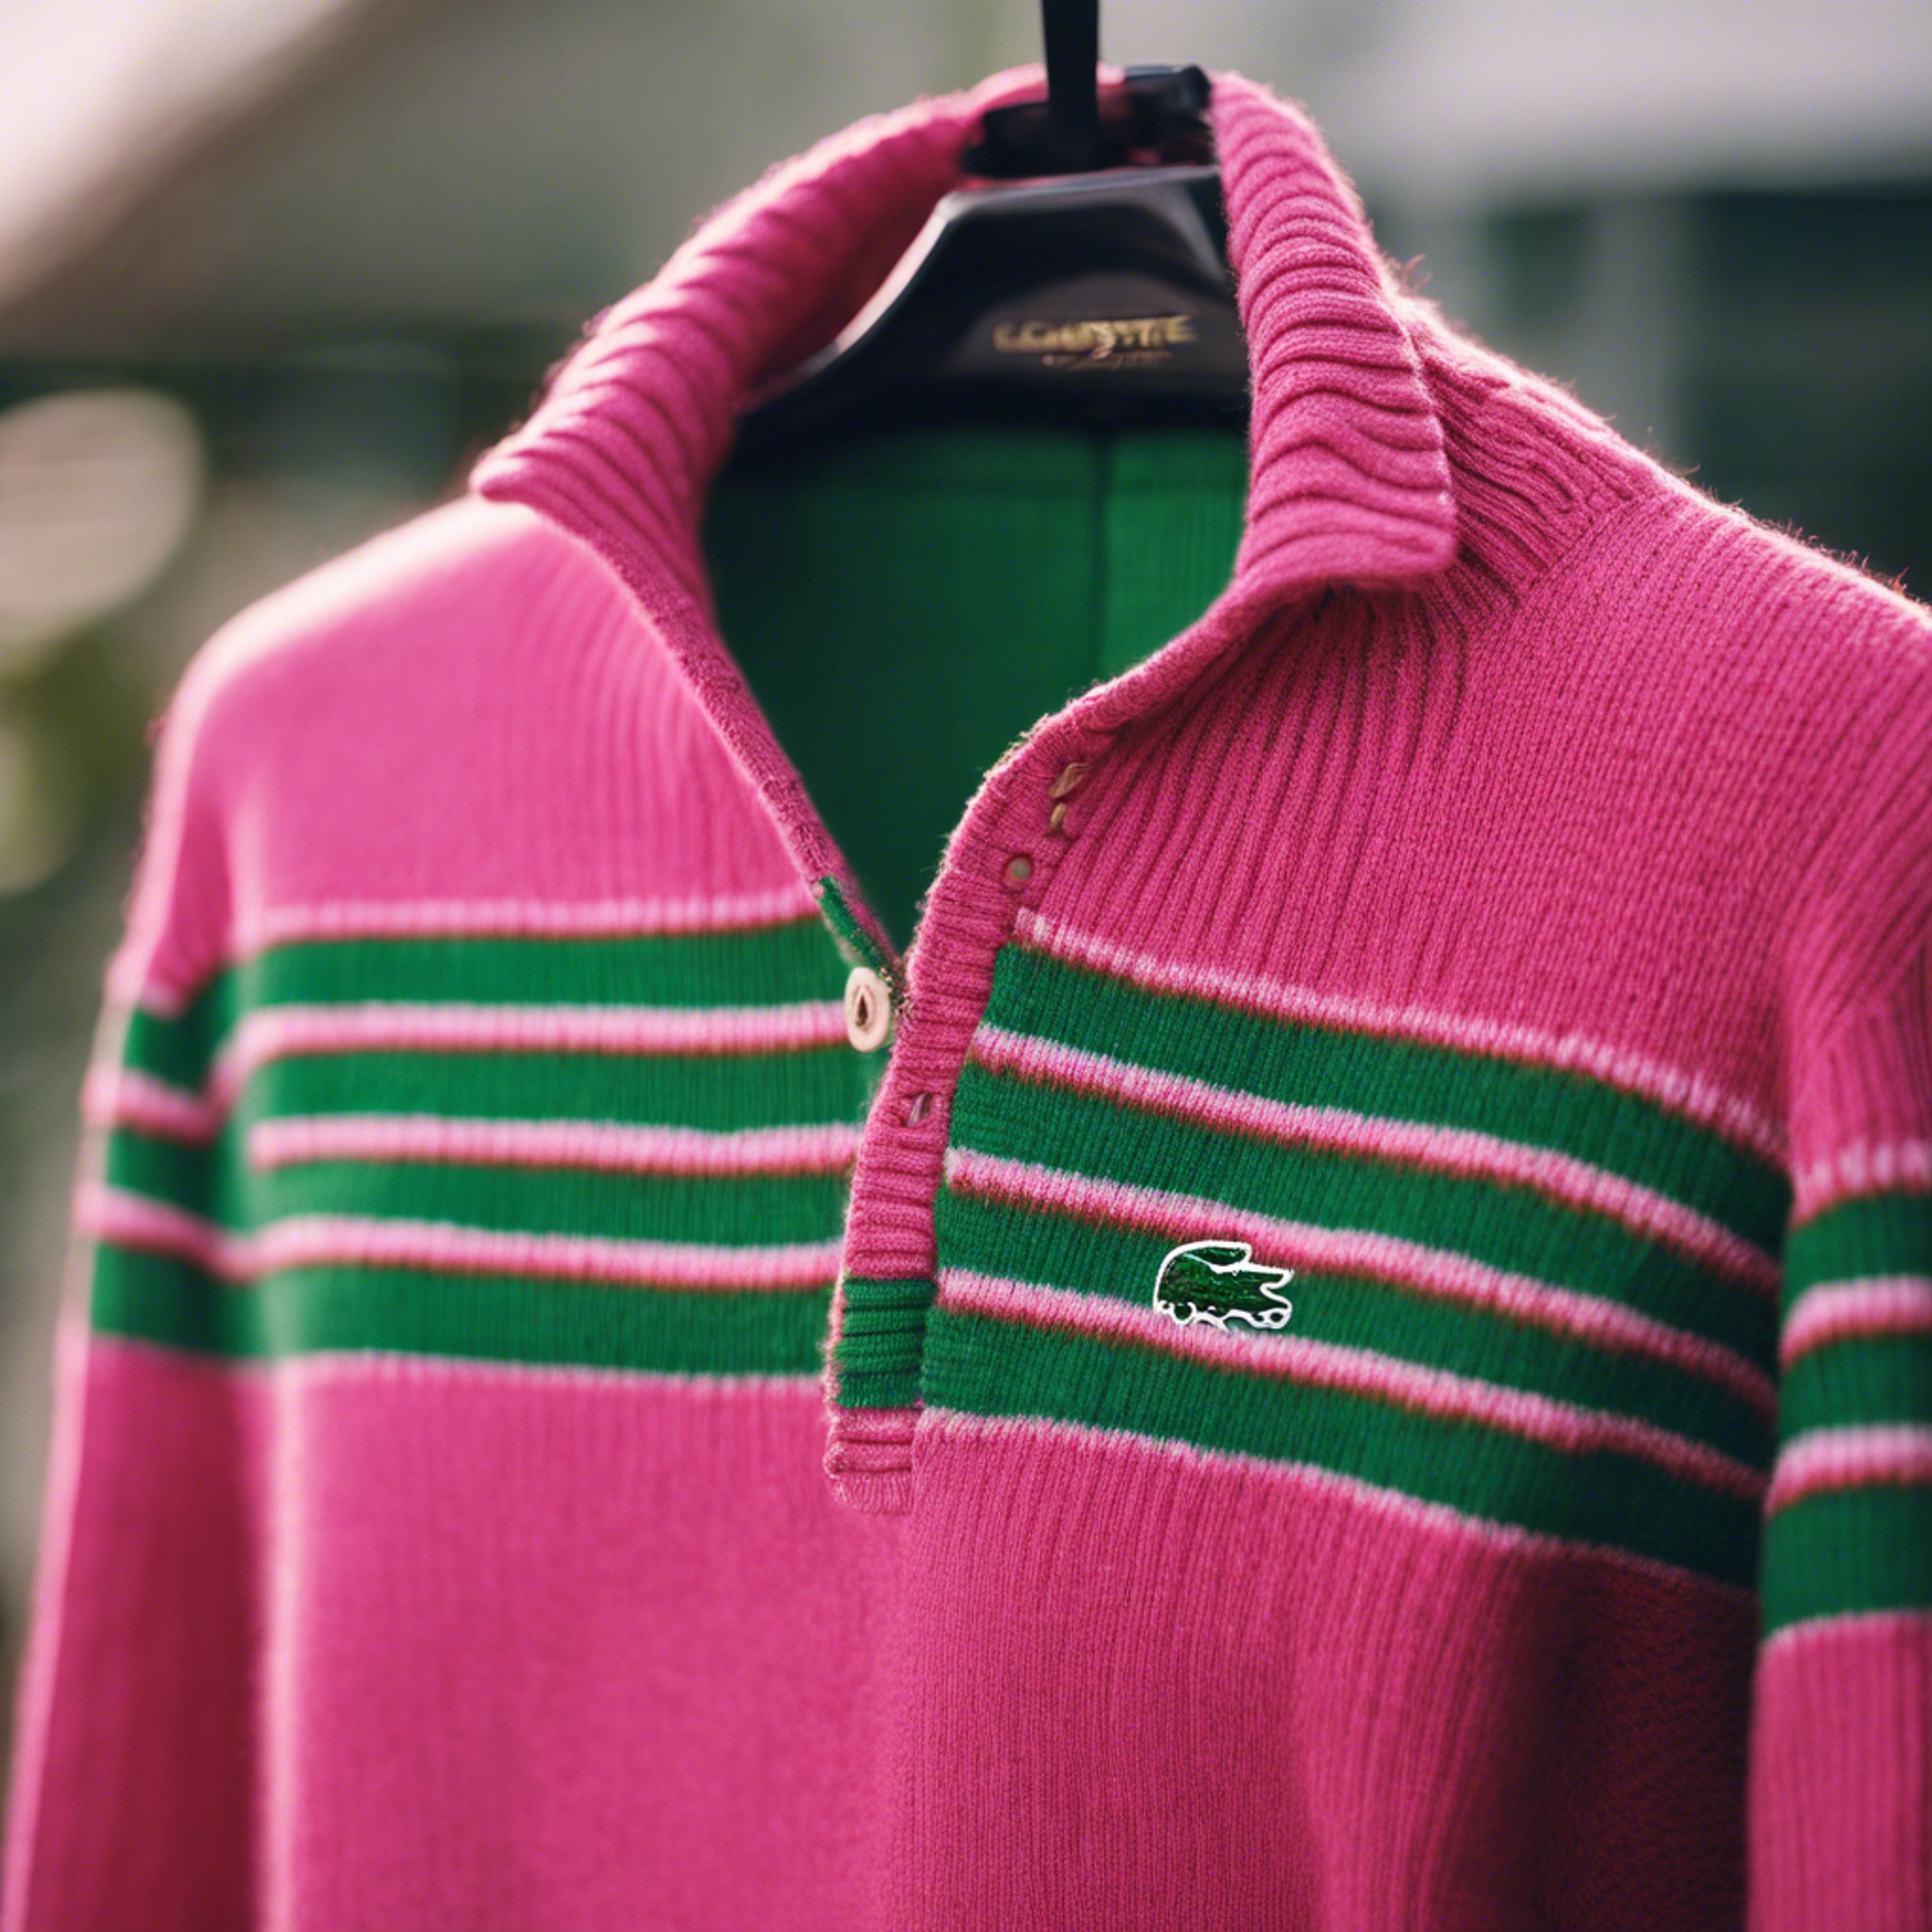 A preppy Lacoste sweater in bright pink and green stripes.壁紙[46dc671cf42d4e658ddb]